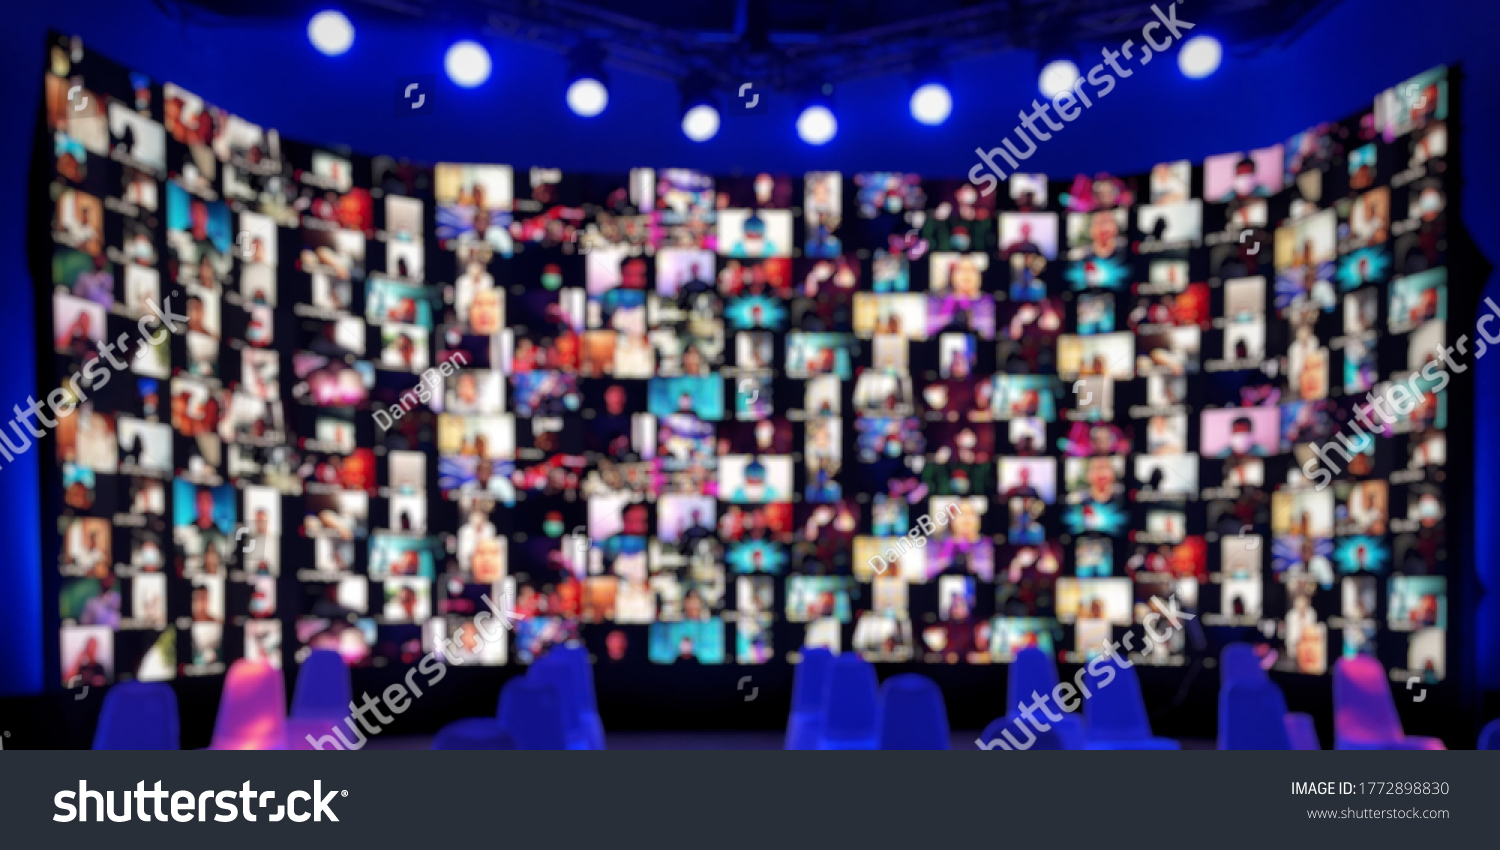 Blur large LED screen show many people's faces join big online event or virtual reality live conference. Big video call seminar, Work from home, Social distancing, New normal event production. #1772898830